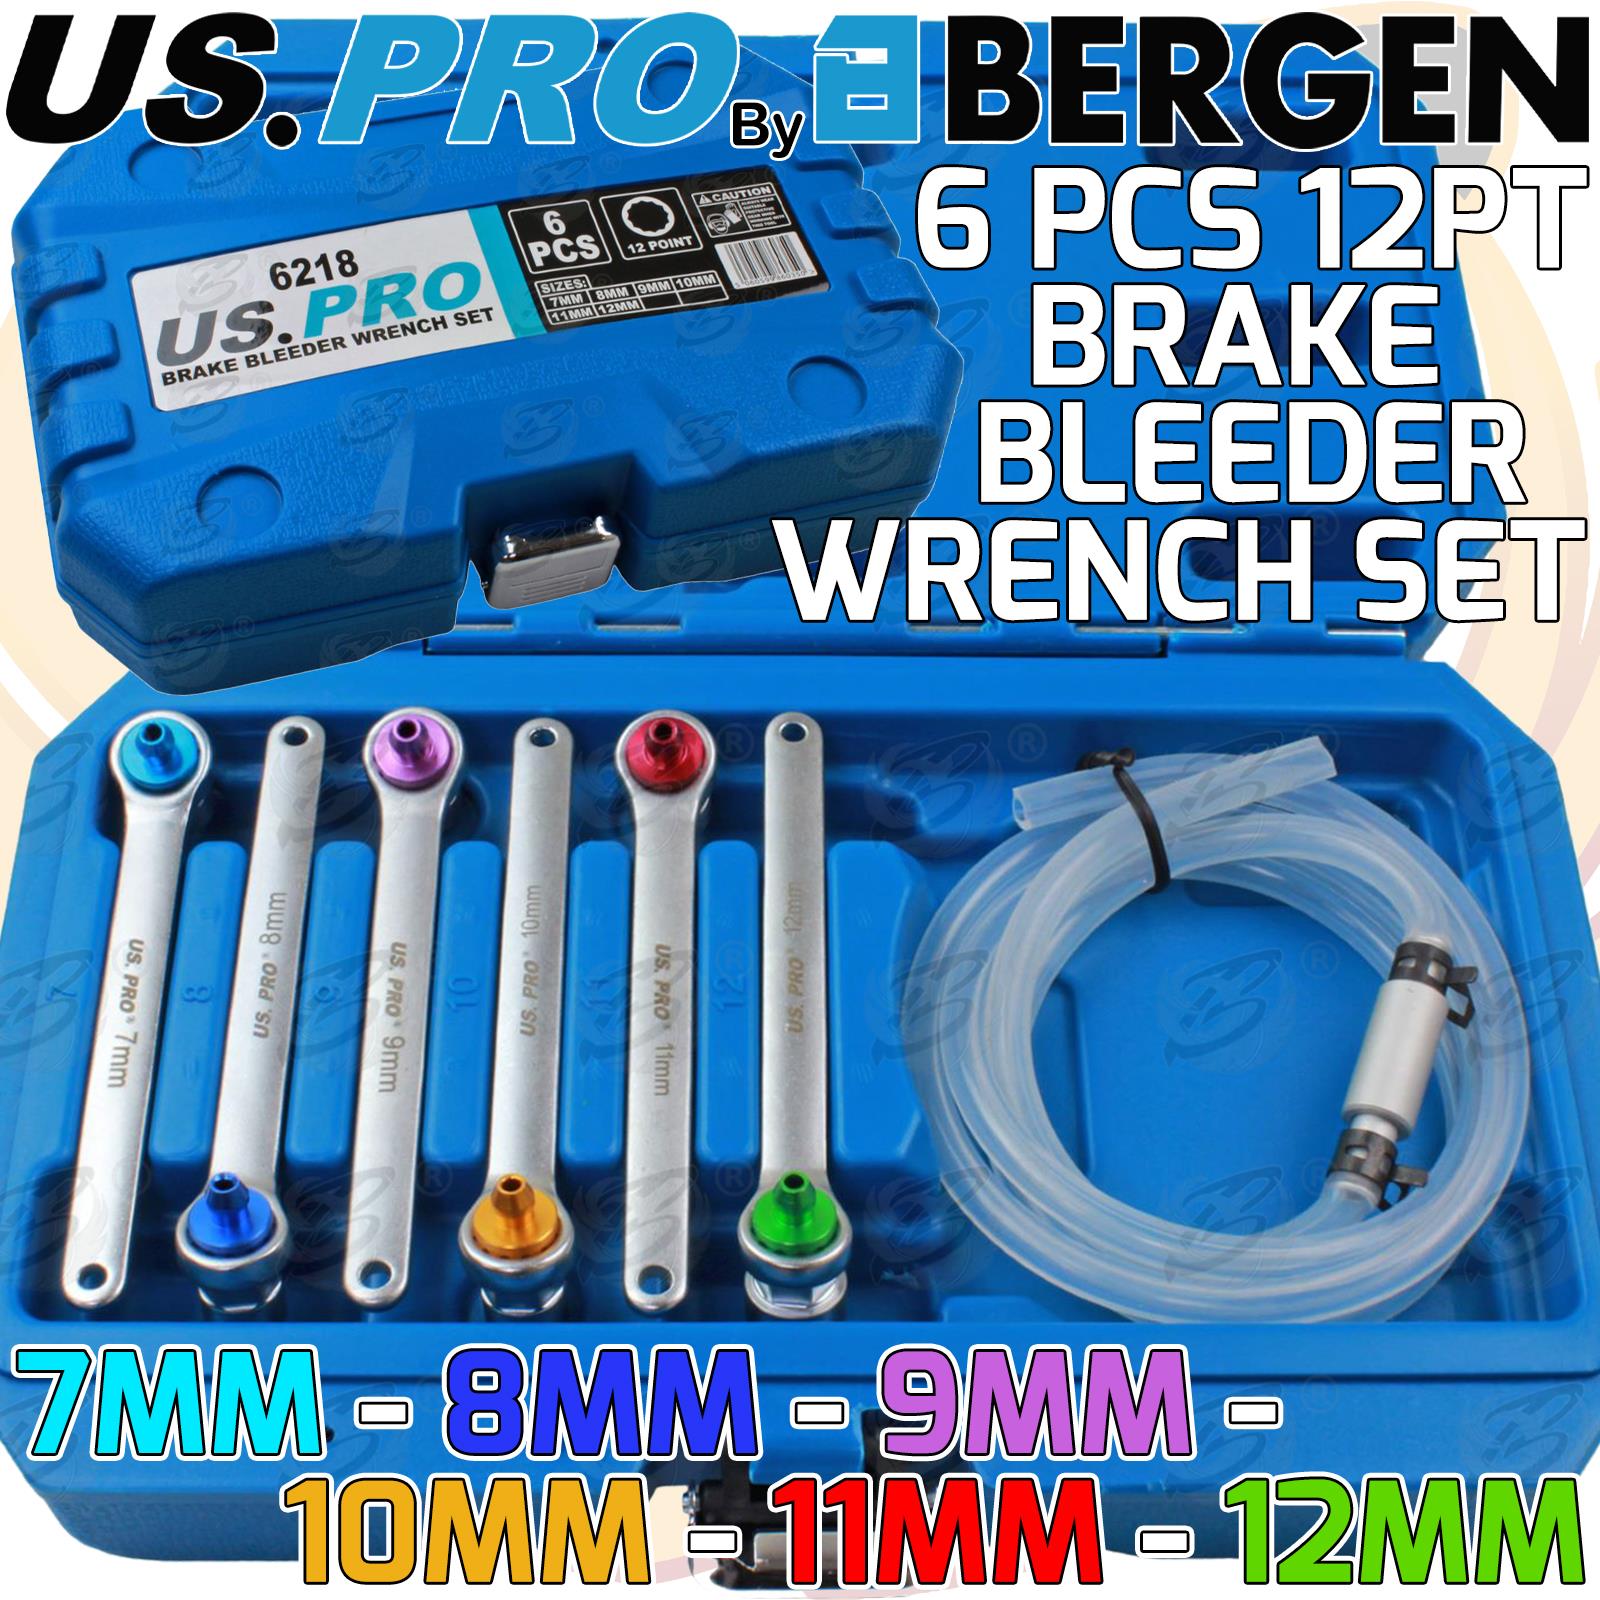 US PRO 6PCS 12 POINT BRAKE CLUTCH BLEED SPANNERS 7MM - 12MM